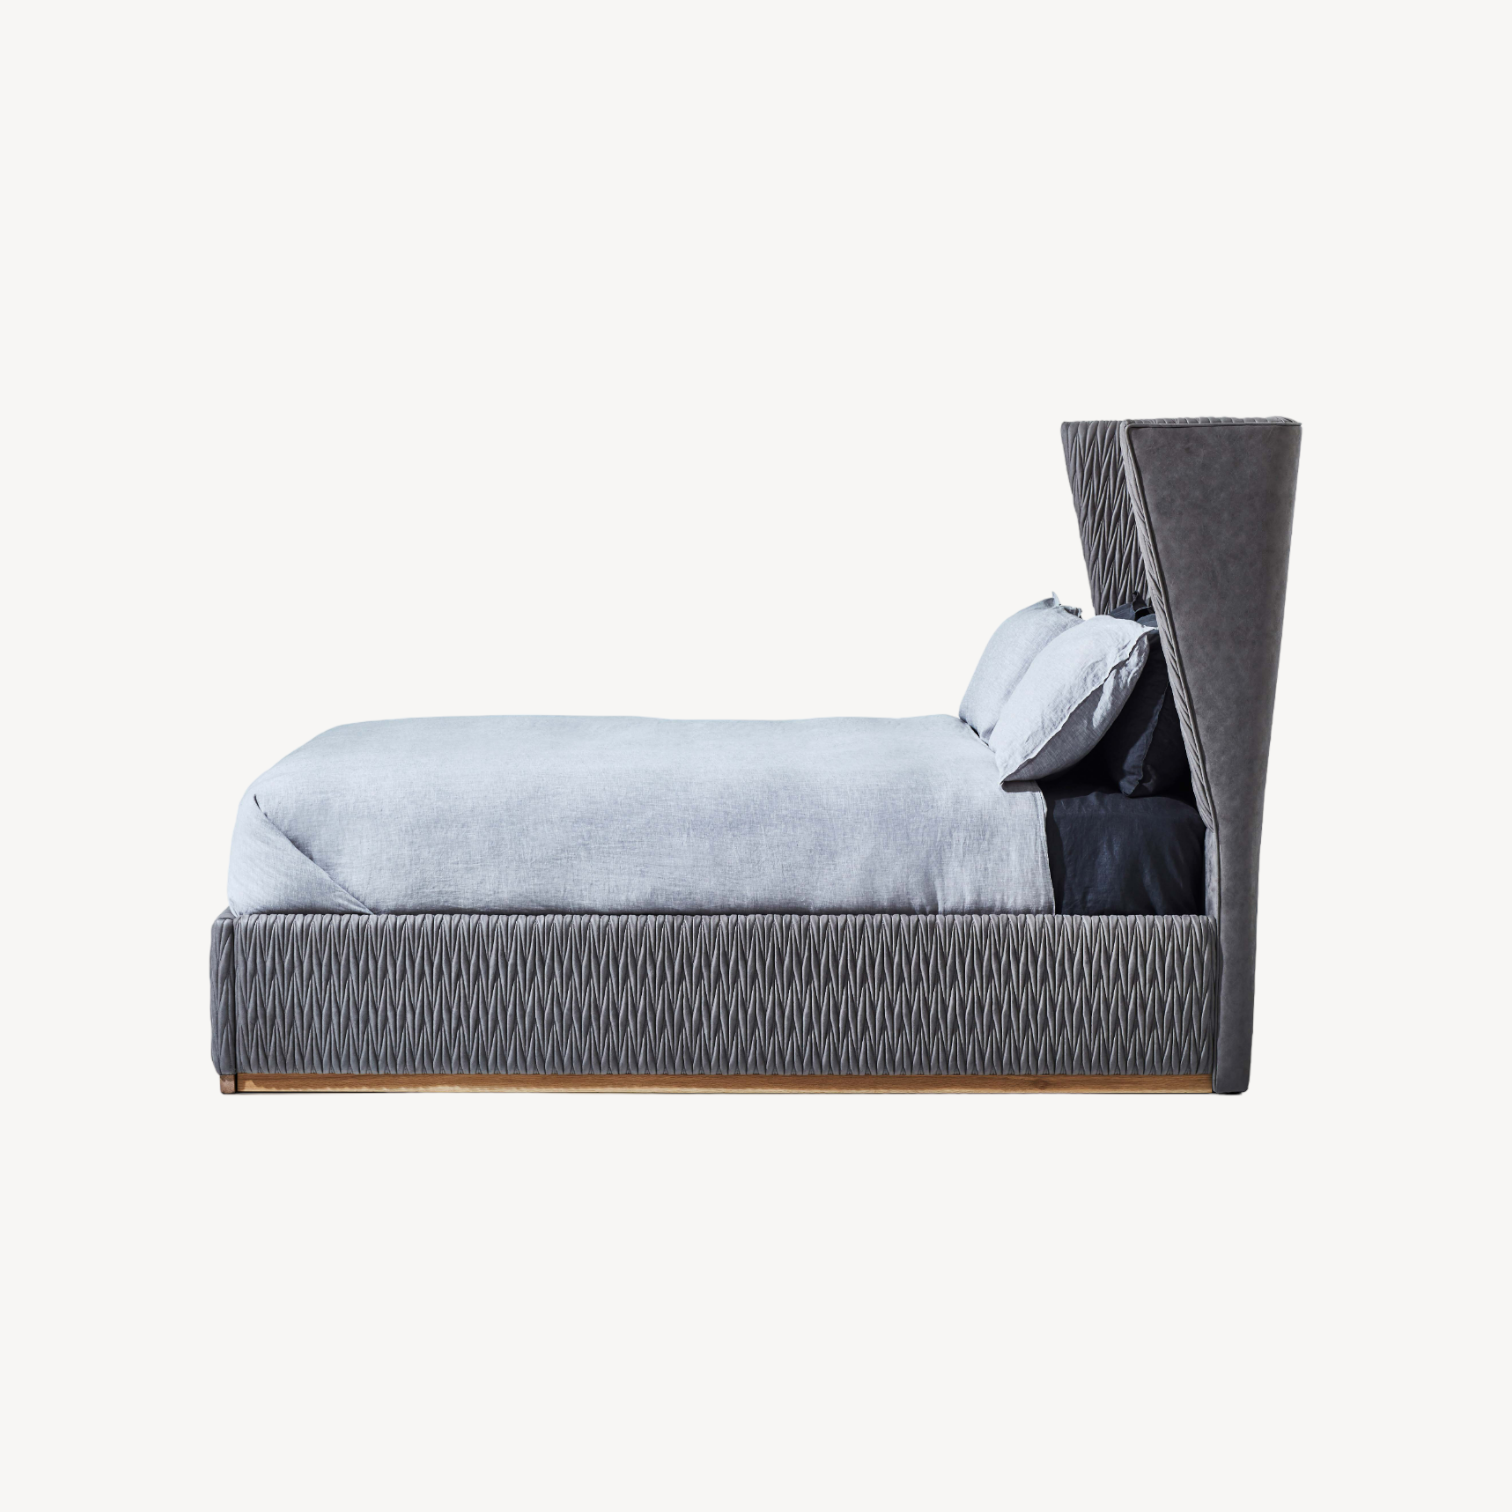 Contour Bed - Zuster Furniture